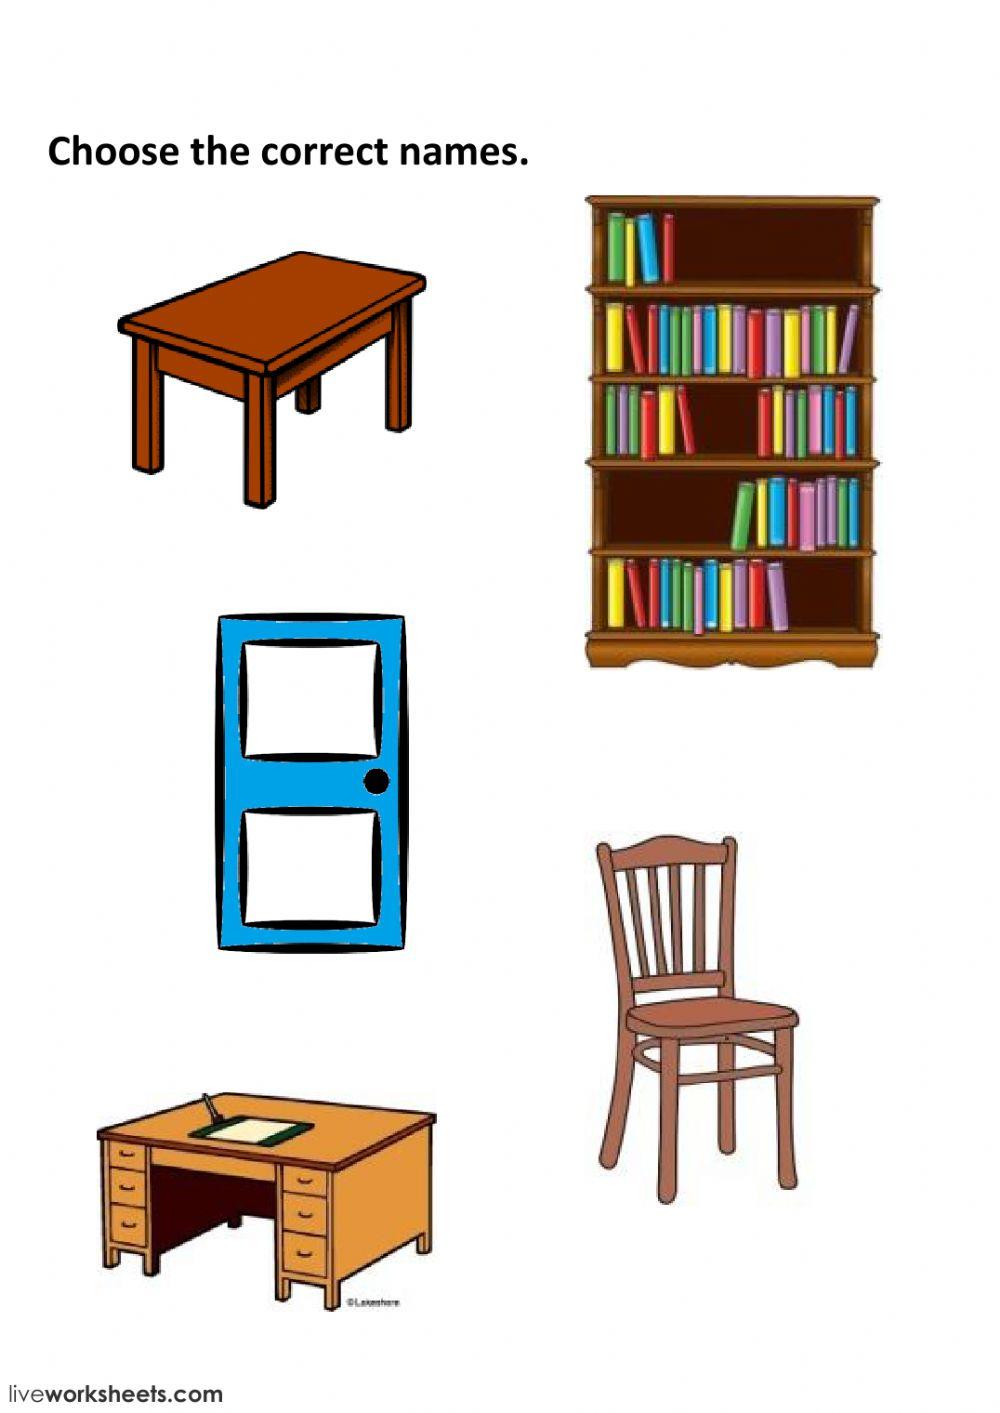 School objects and furniture